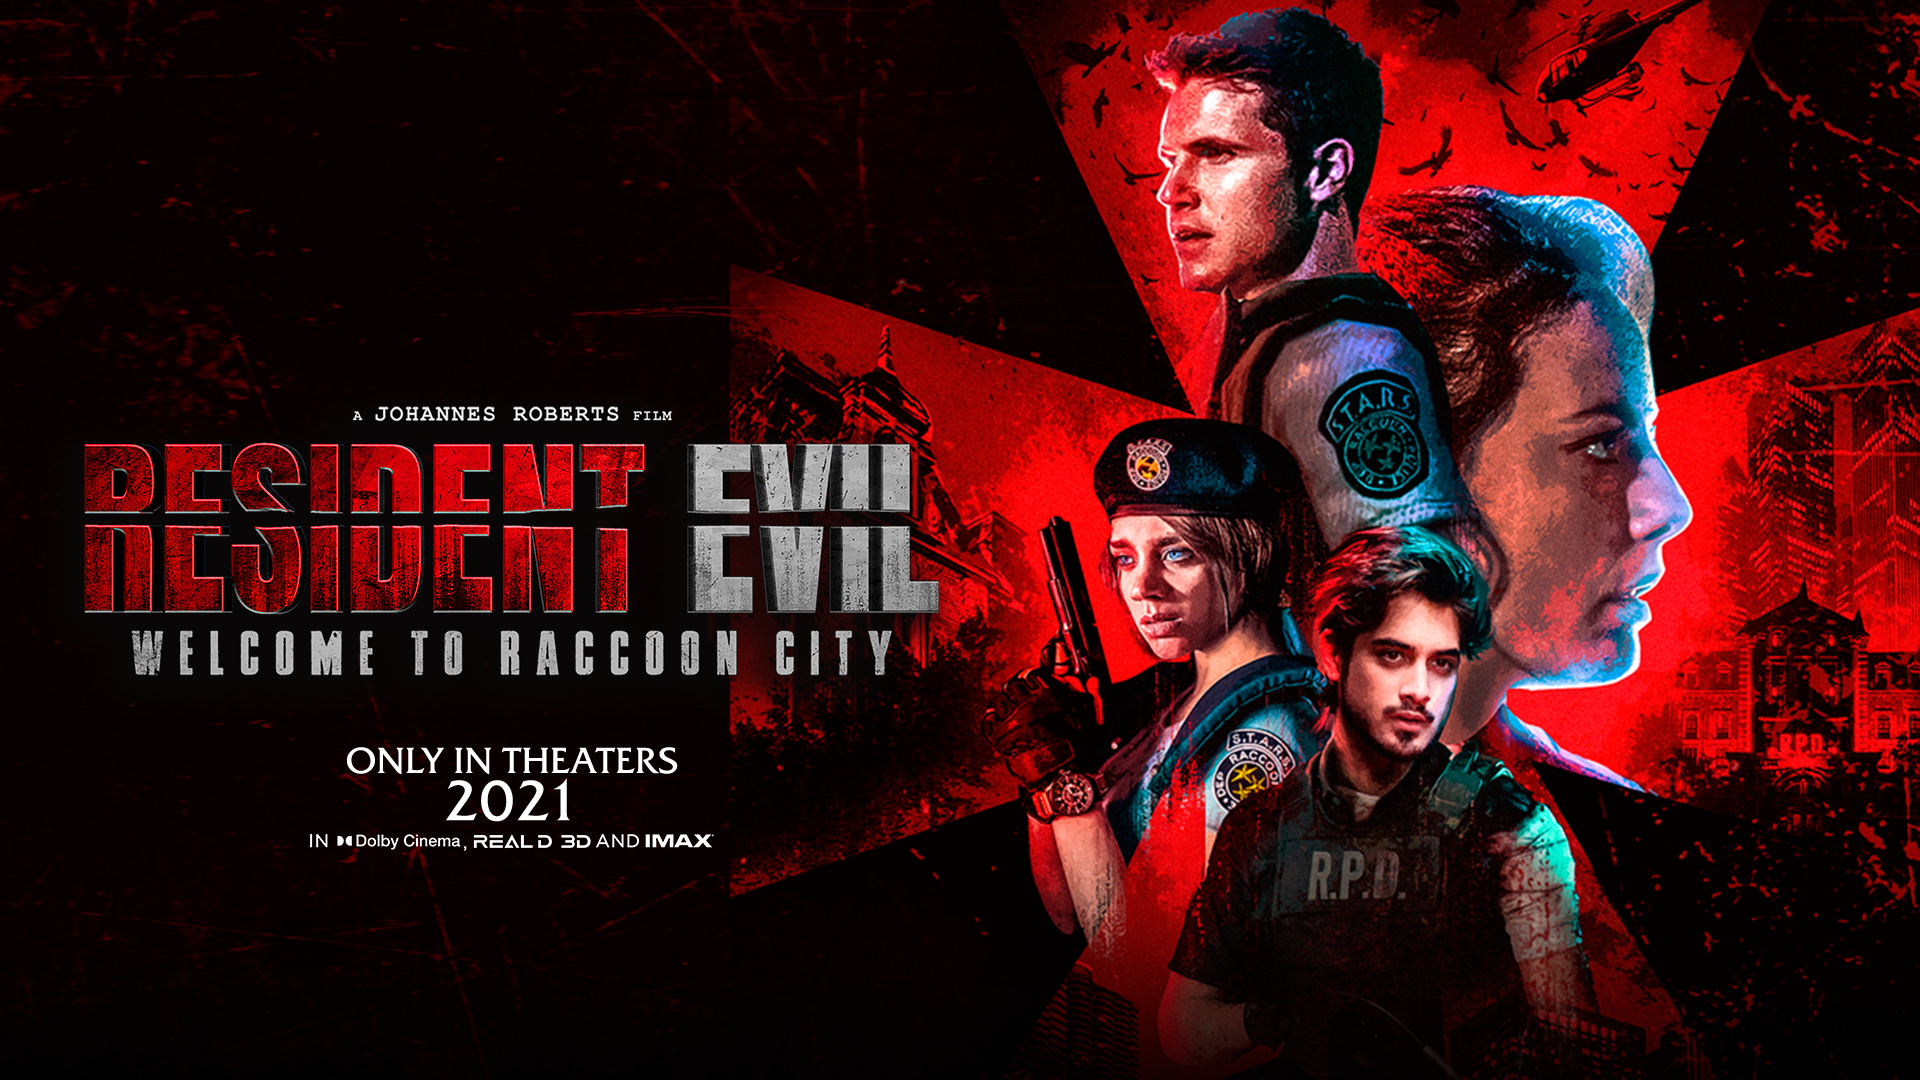 1440x25602021911 Poster of Resident Evil Welcome To Raccoon City  1440x25602021911 Resolution Wallpaper, HD Movies 4K Wallpapers, Images,  Photos and Background - Wallpapers Den